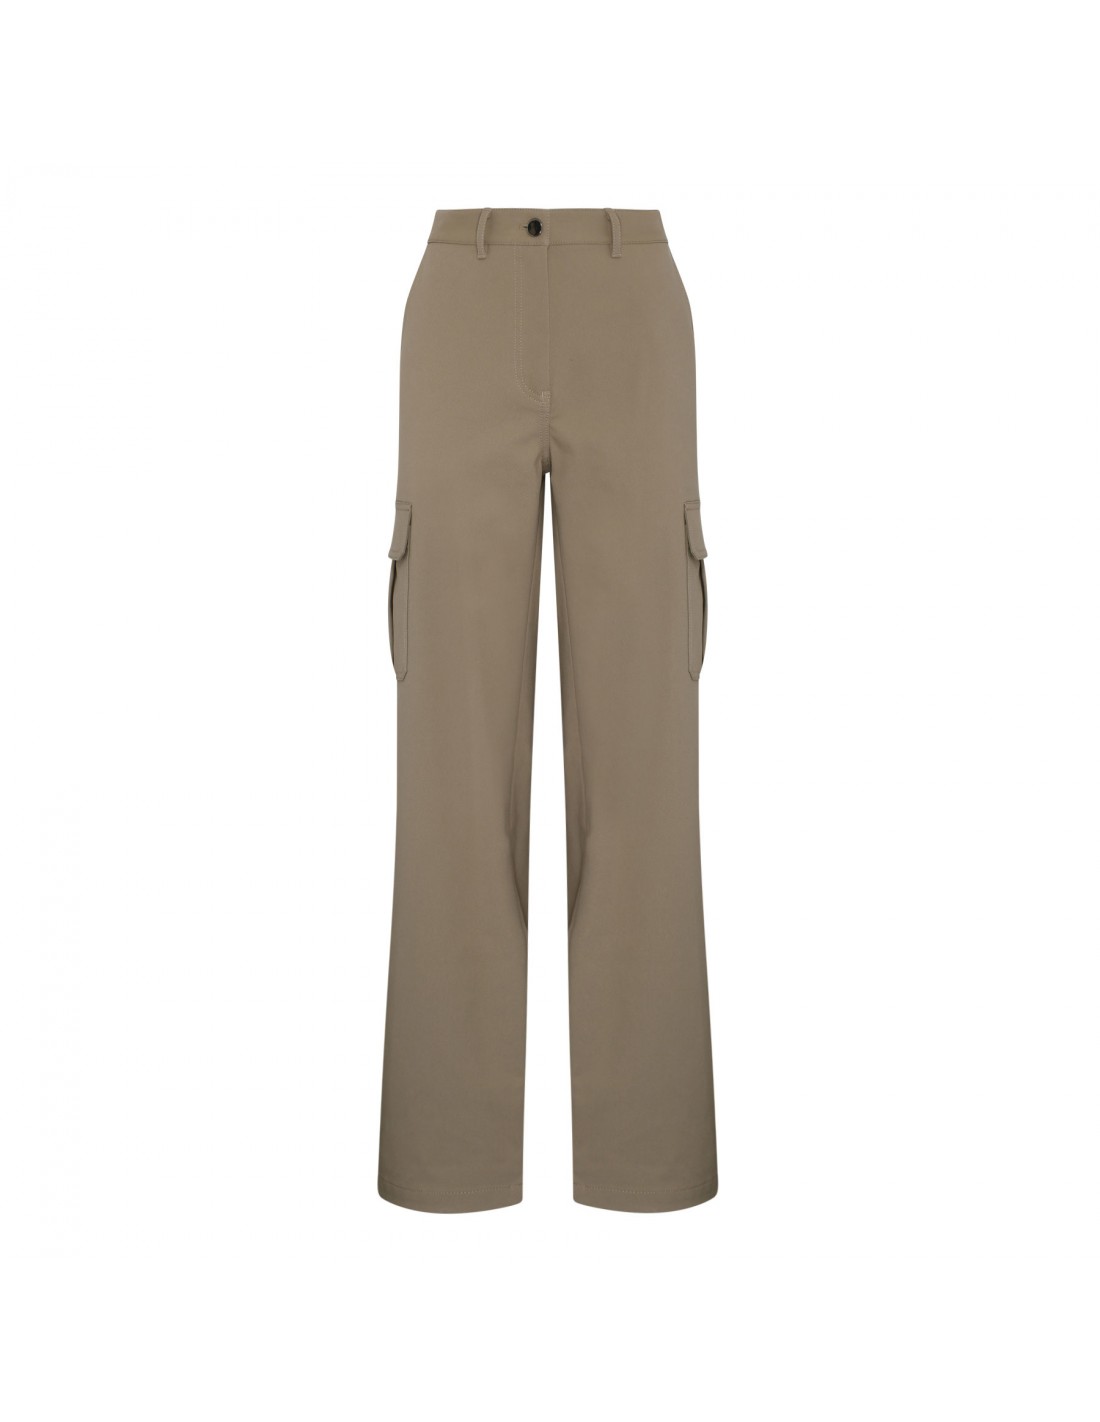 Taupe cargo pants